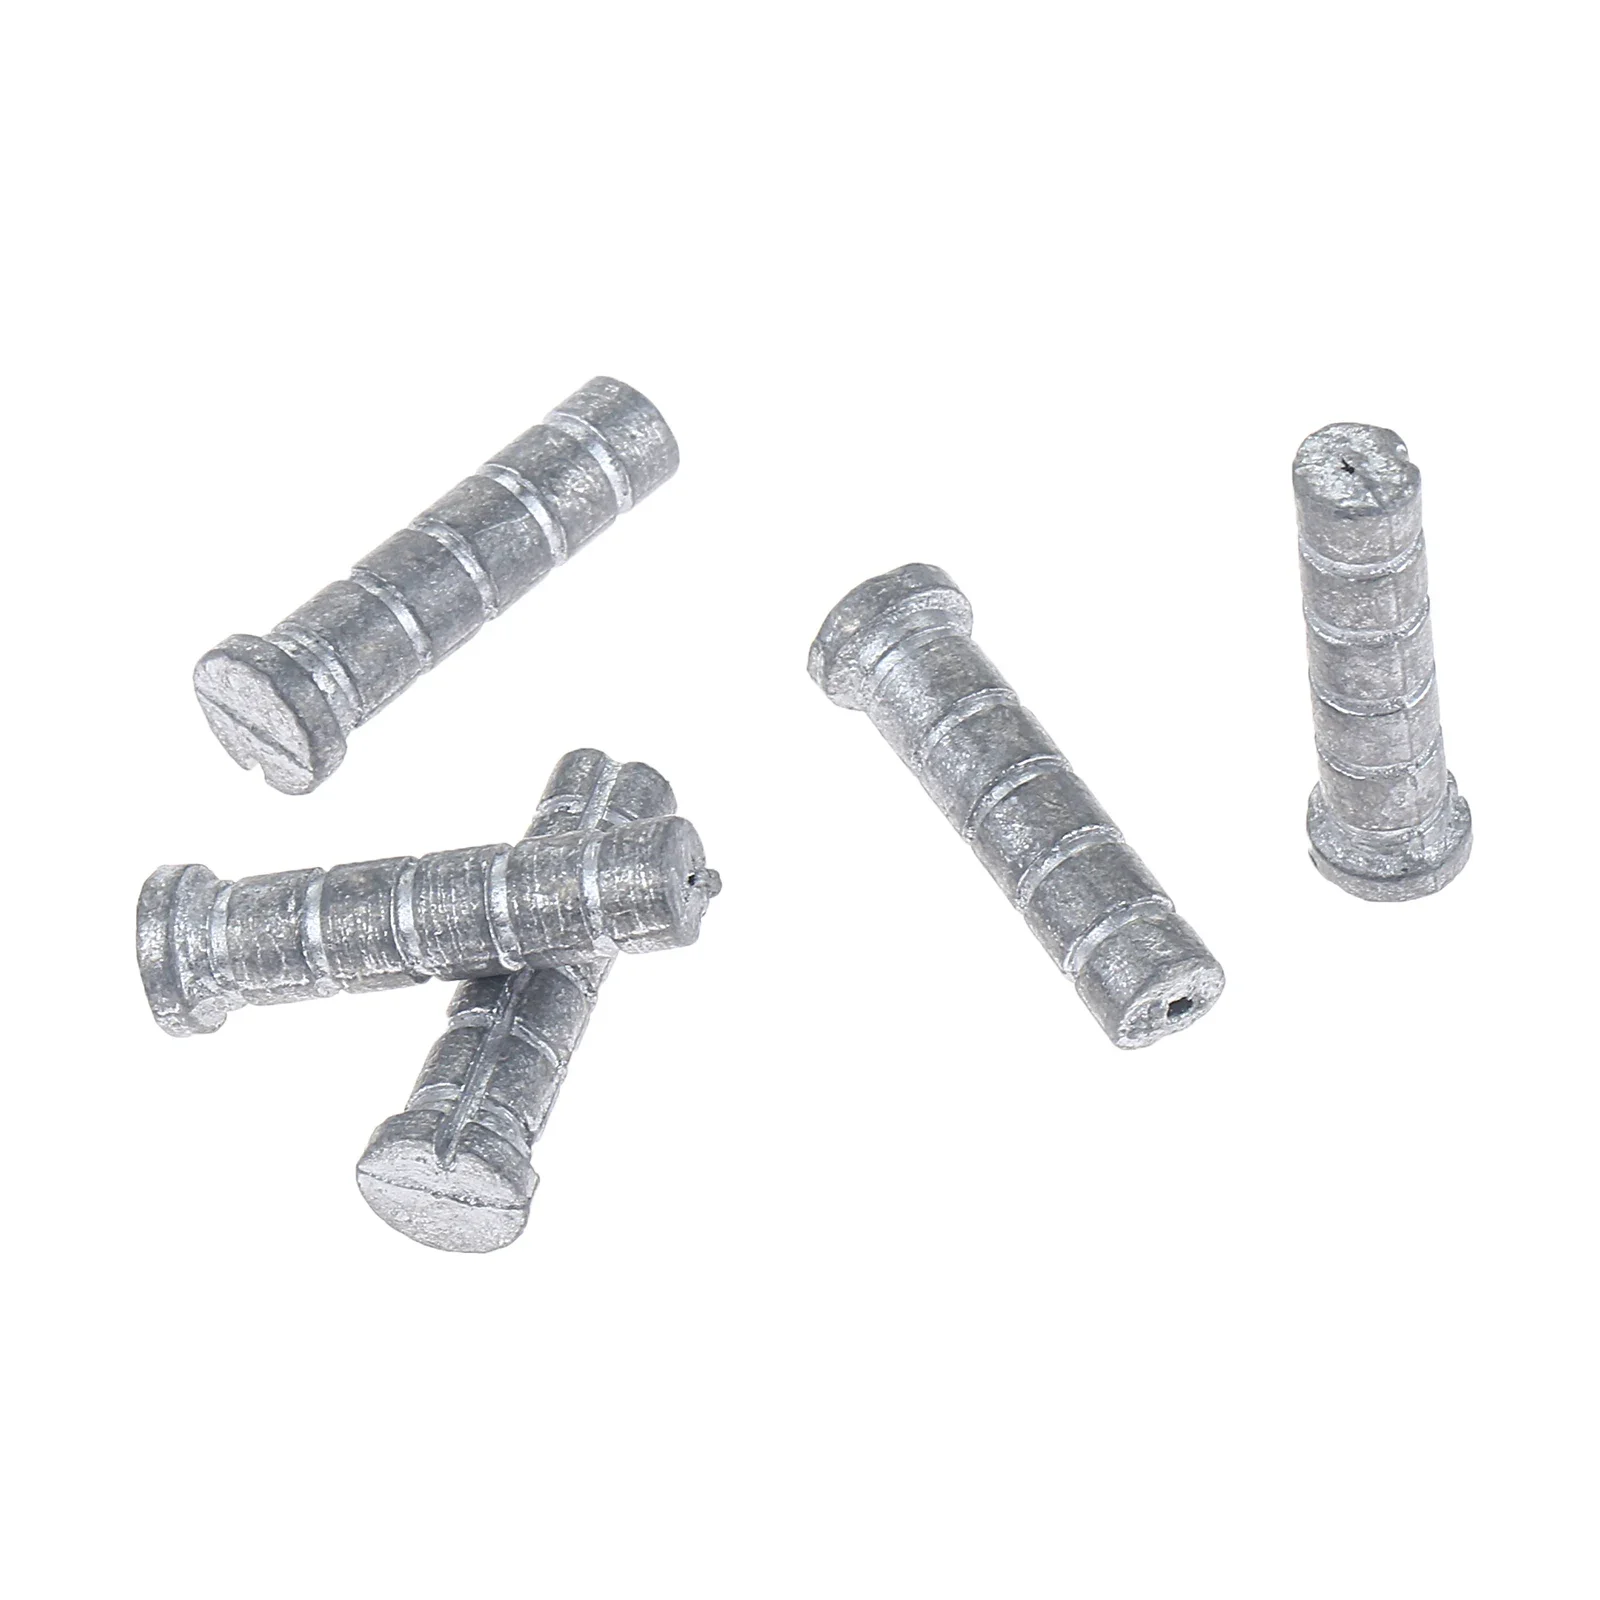 

5Pcs Golf Lead Plug Weights Swing Weights Replacement 10g for 0.335 0.350 0.355 0.370 Diameter 7mm Steel Club Shafts Accessories